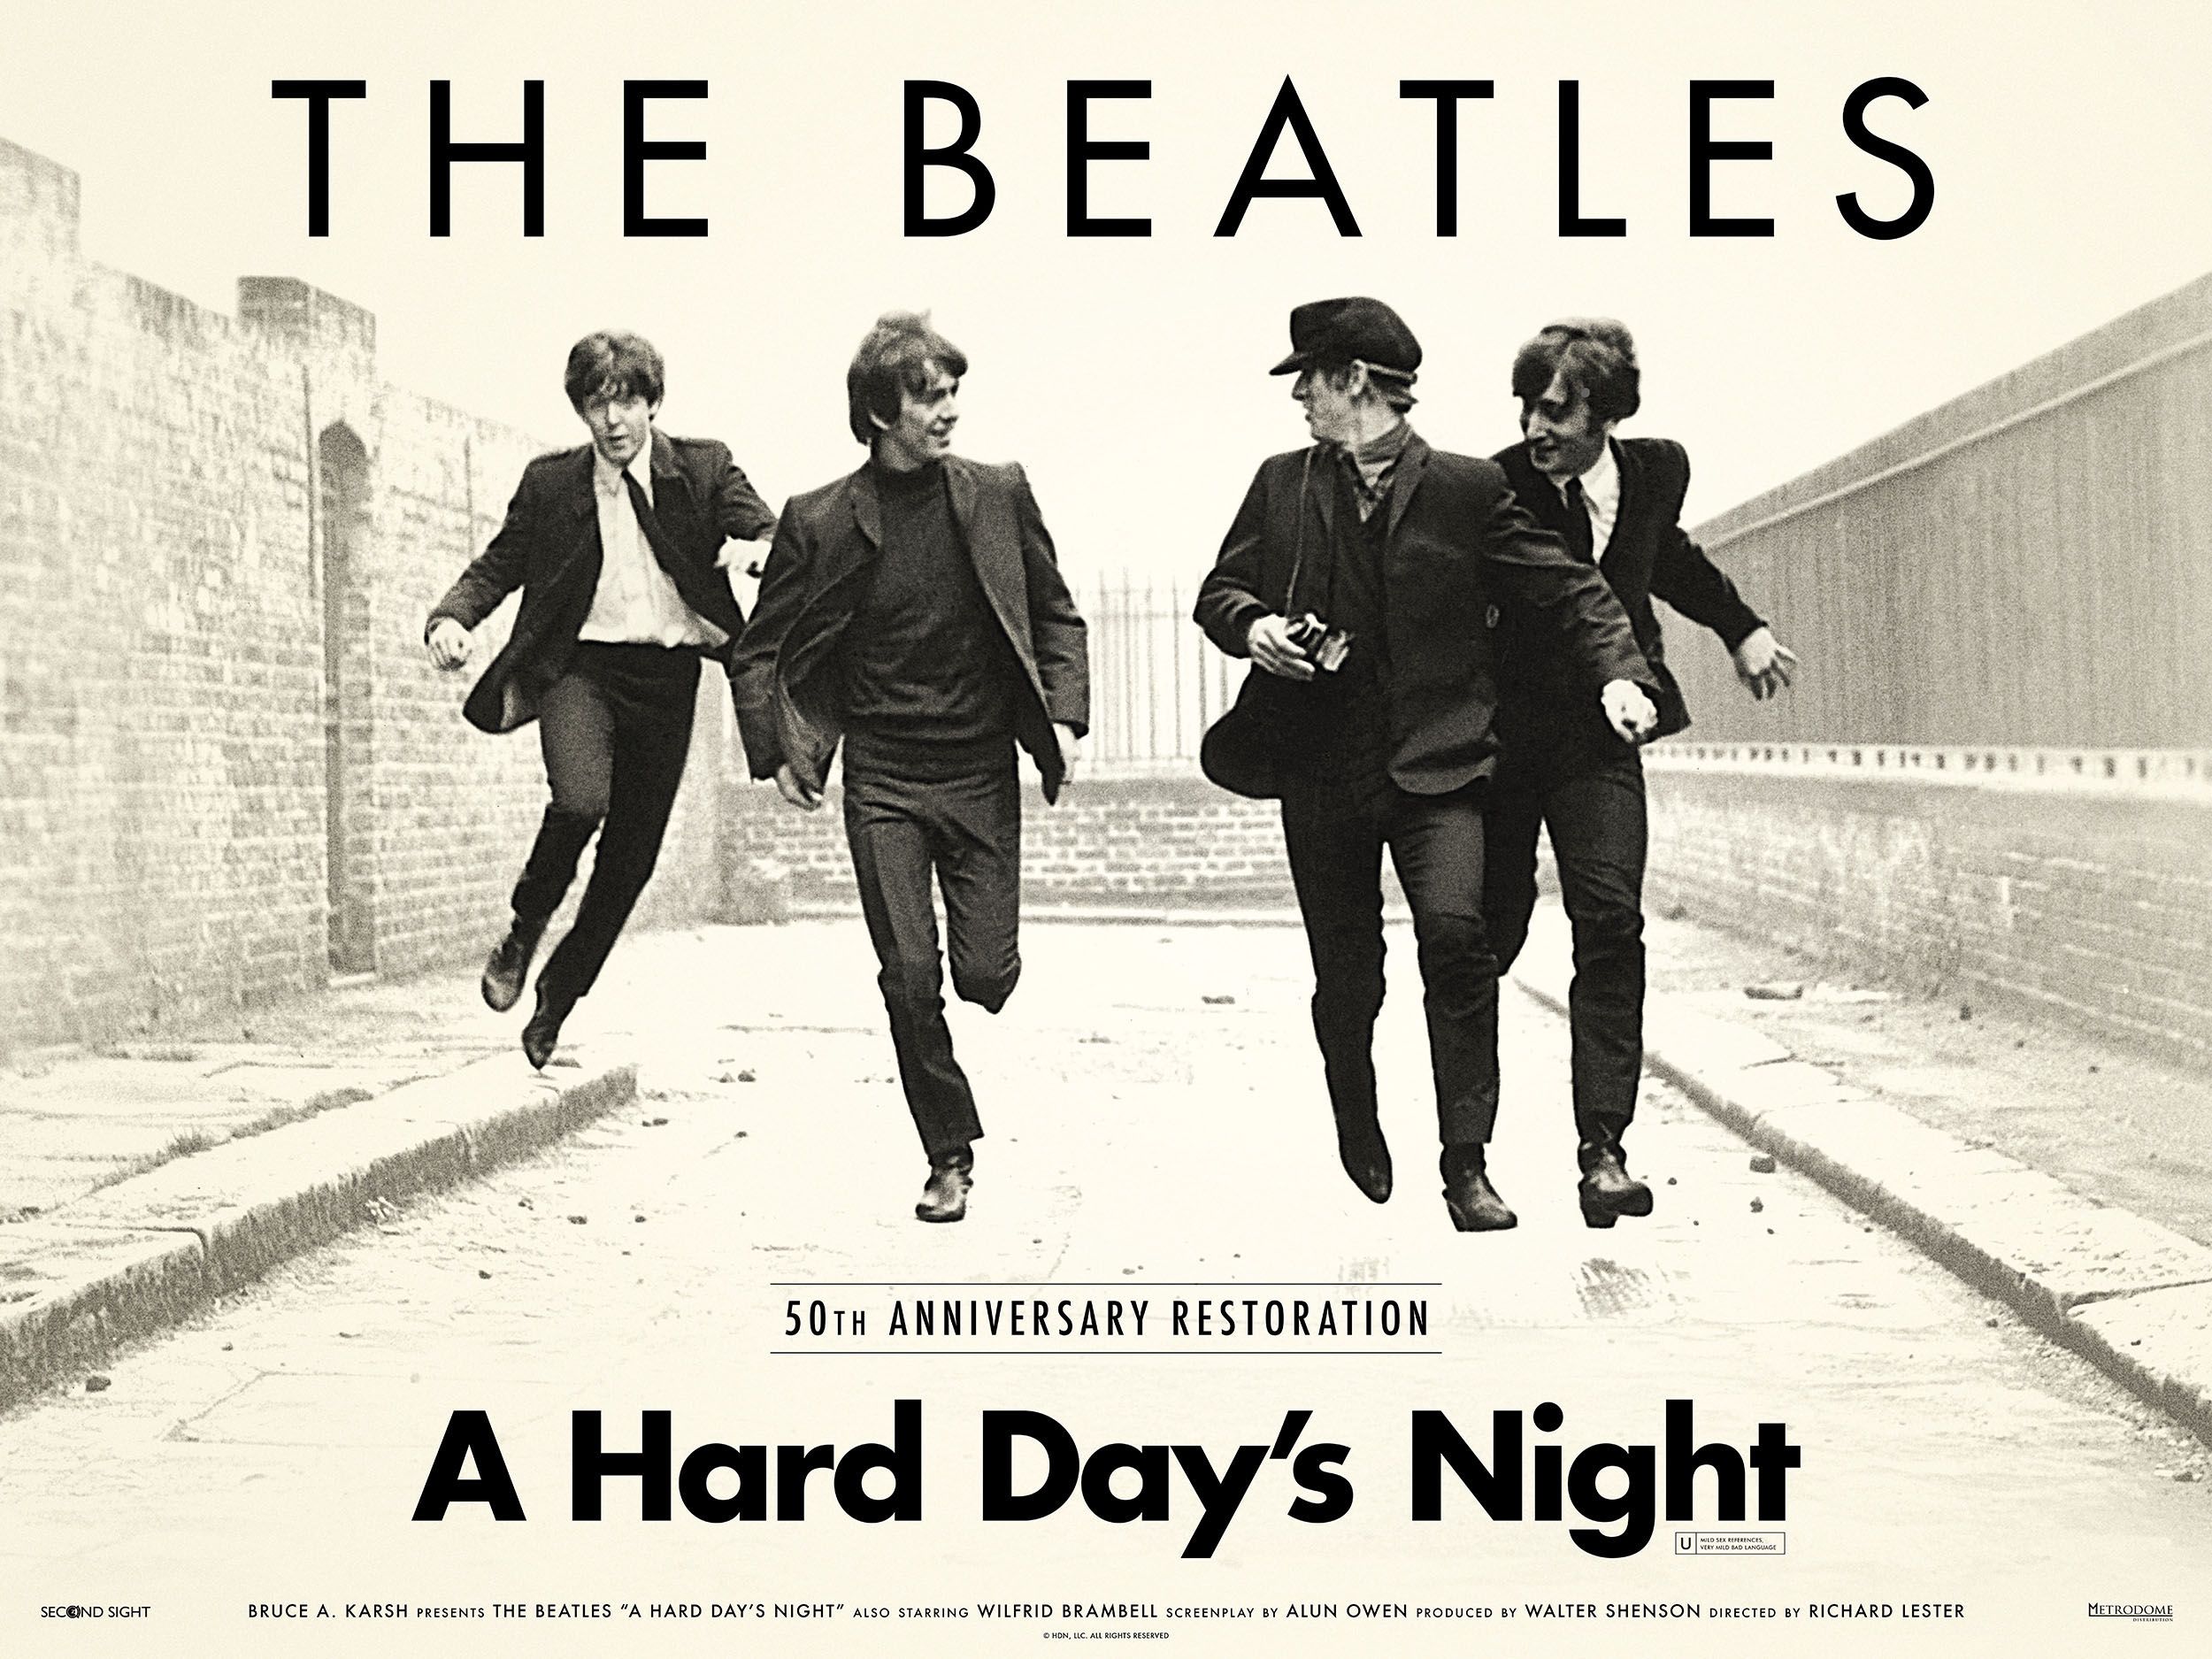 New artwork for The Beatles 'A Hard Day's Night' 50th Anniversary